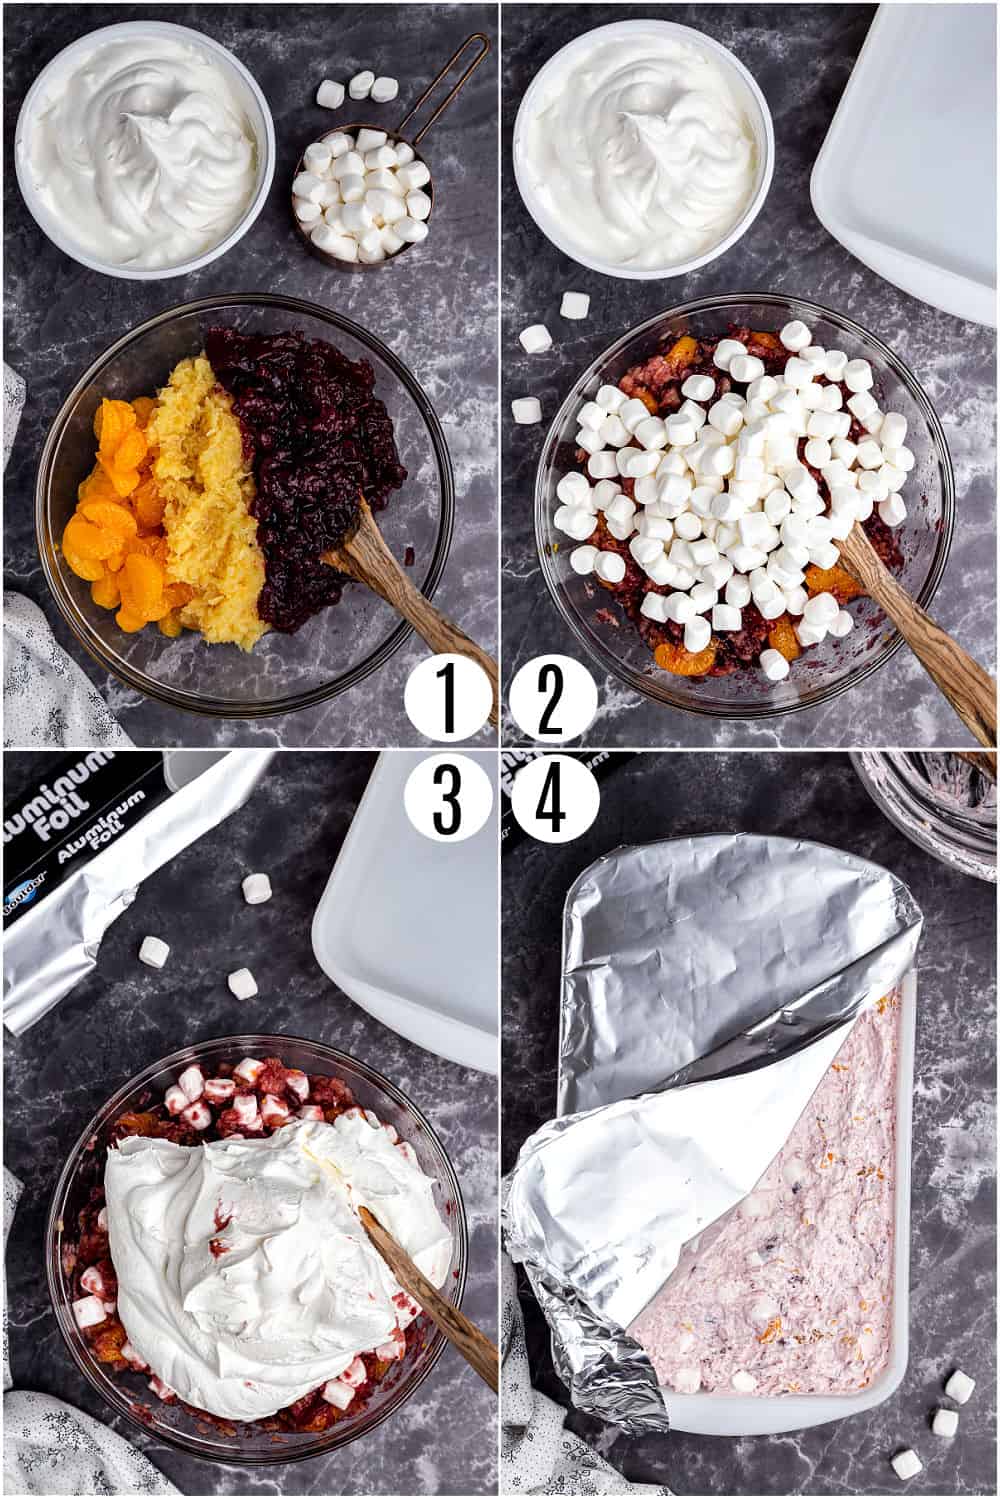 Step by step photos showing how to make cranberry orange salad.